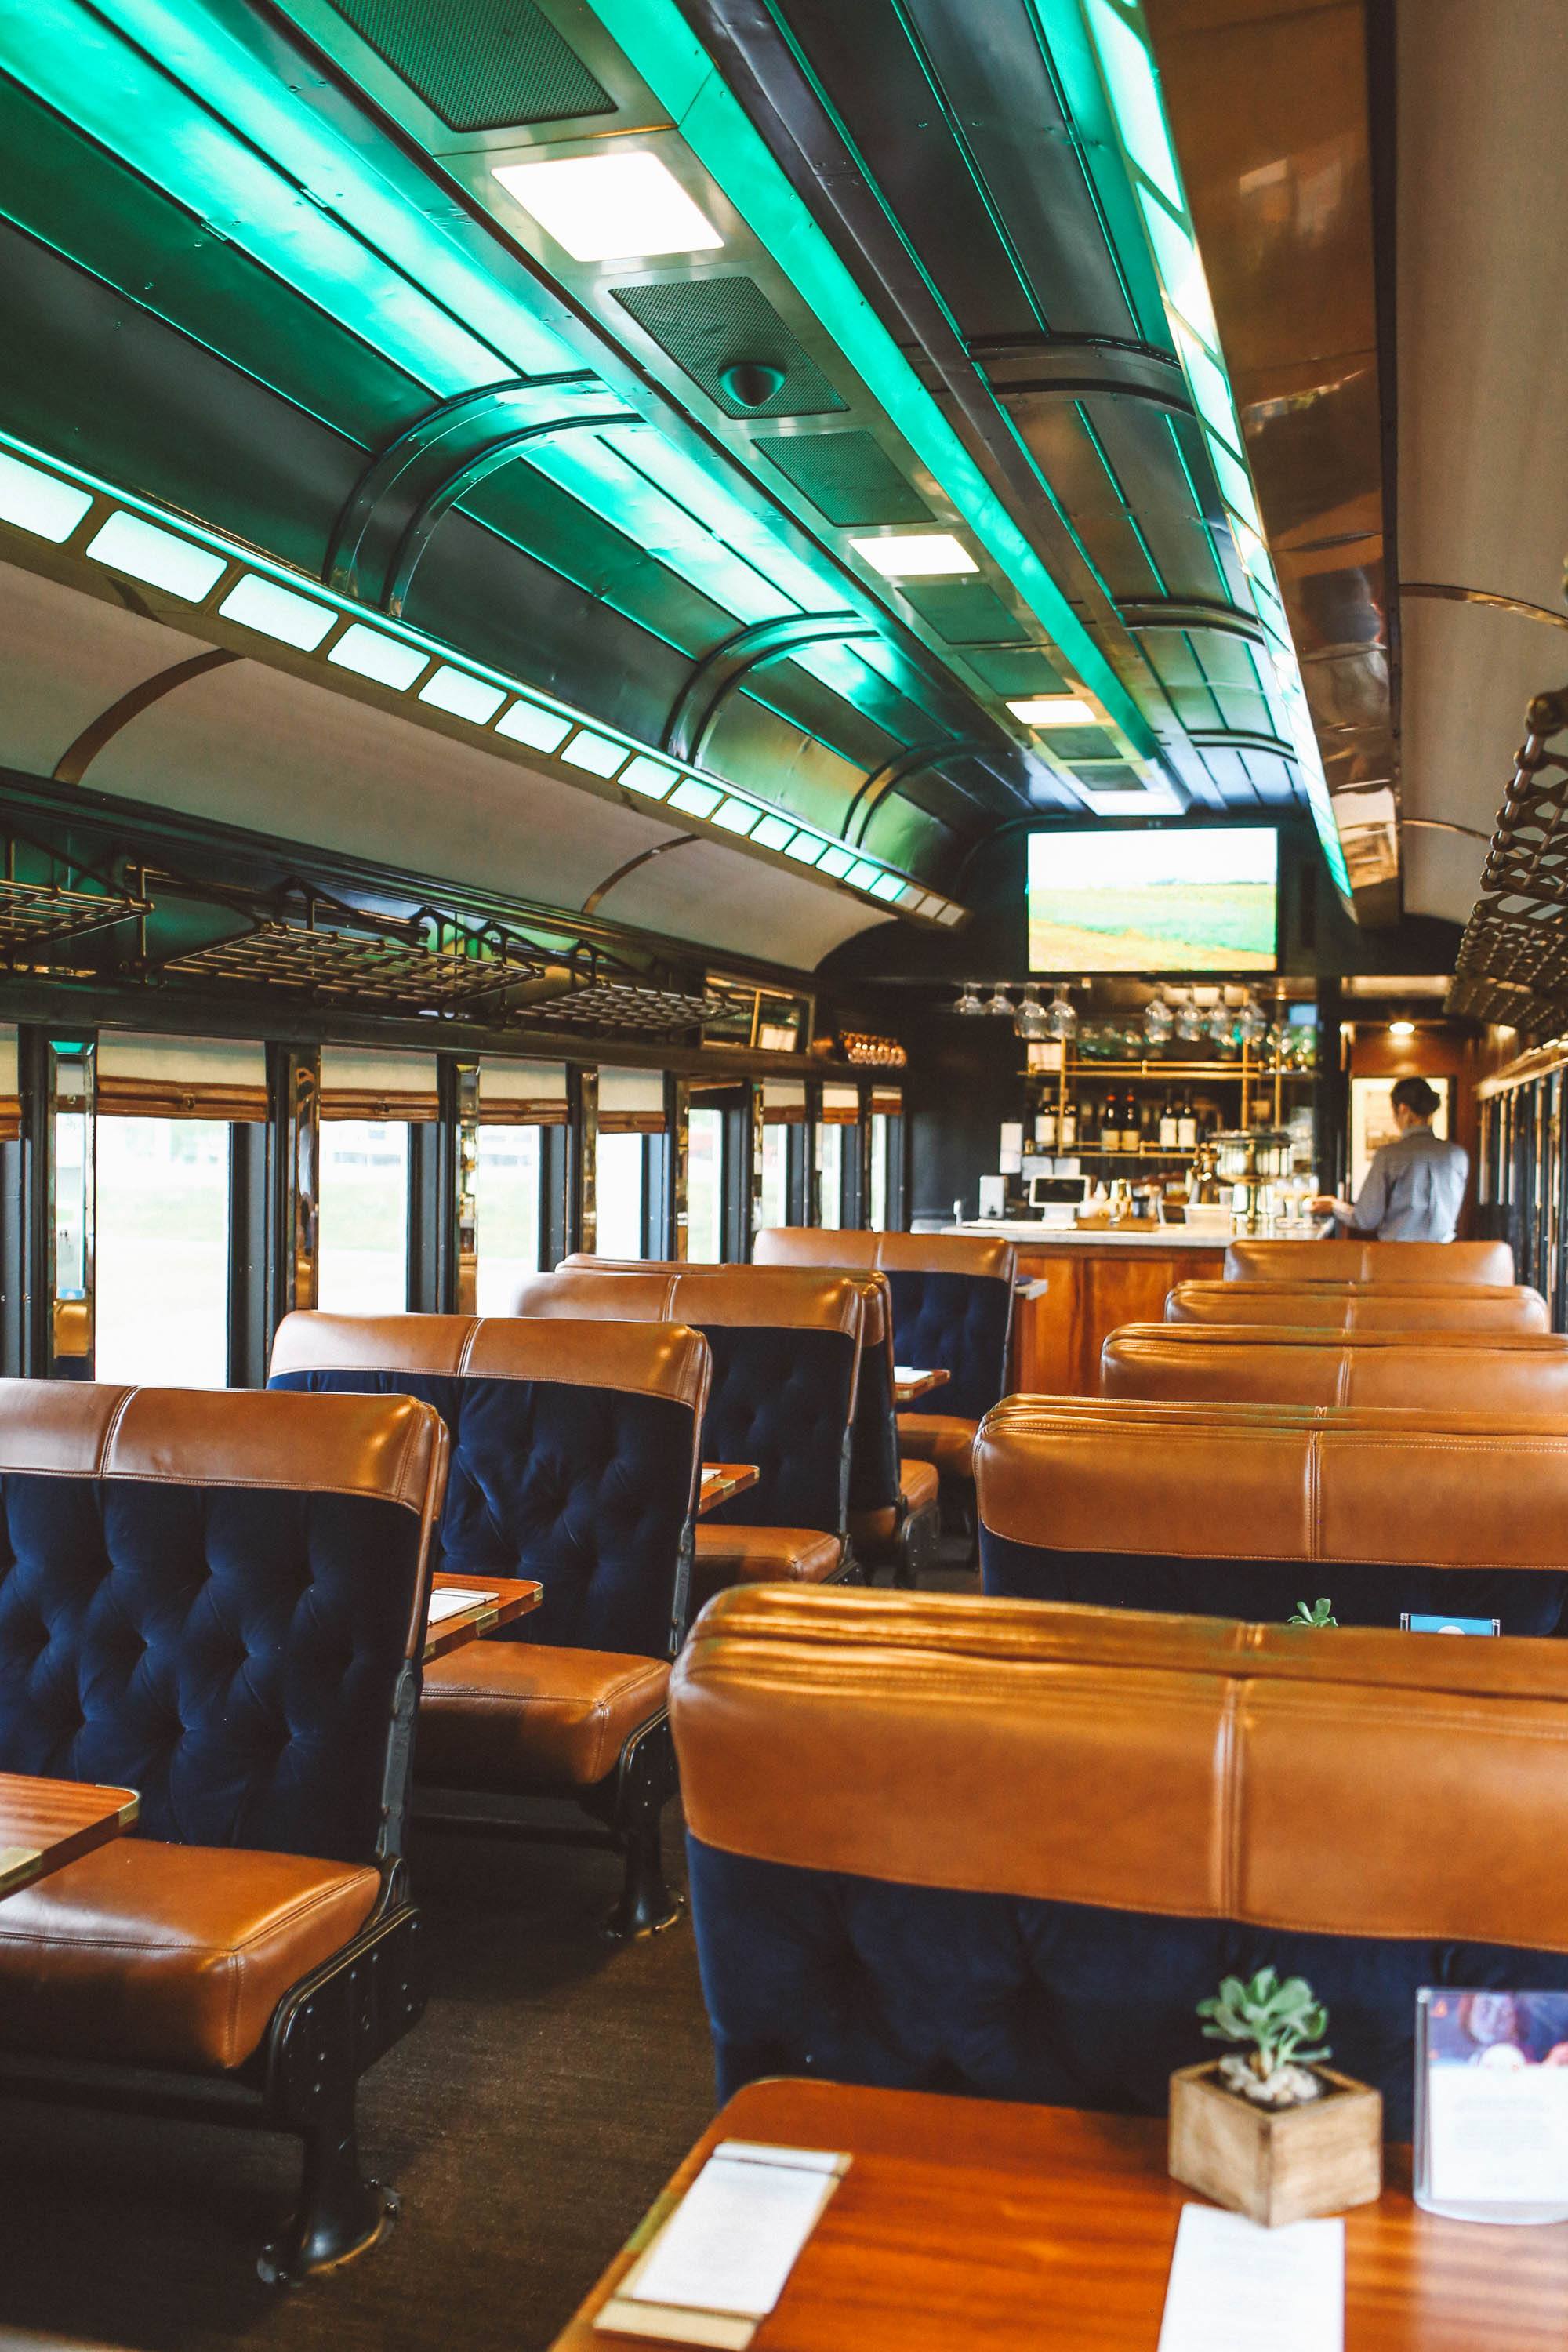 Inside of the Napa Valley Wine Train